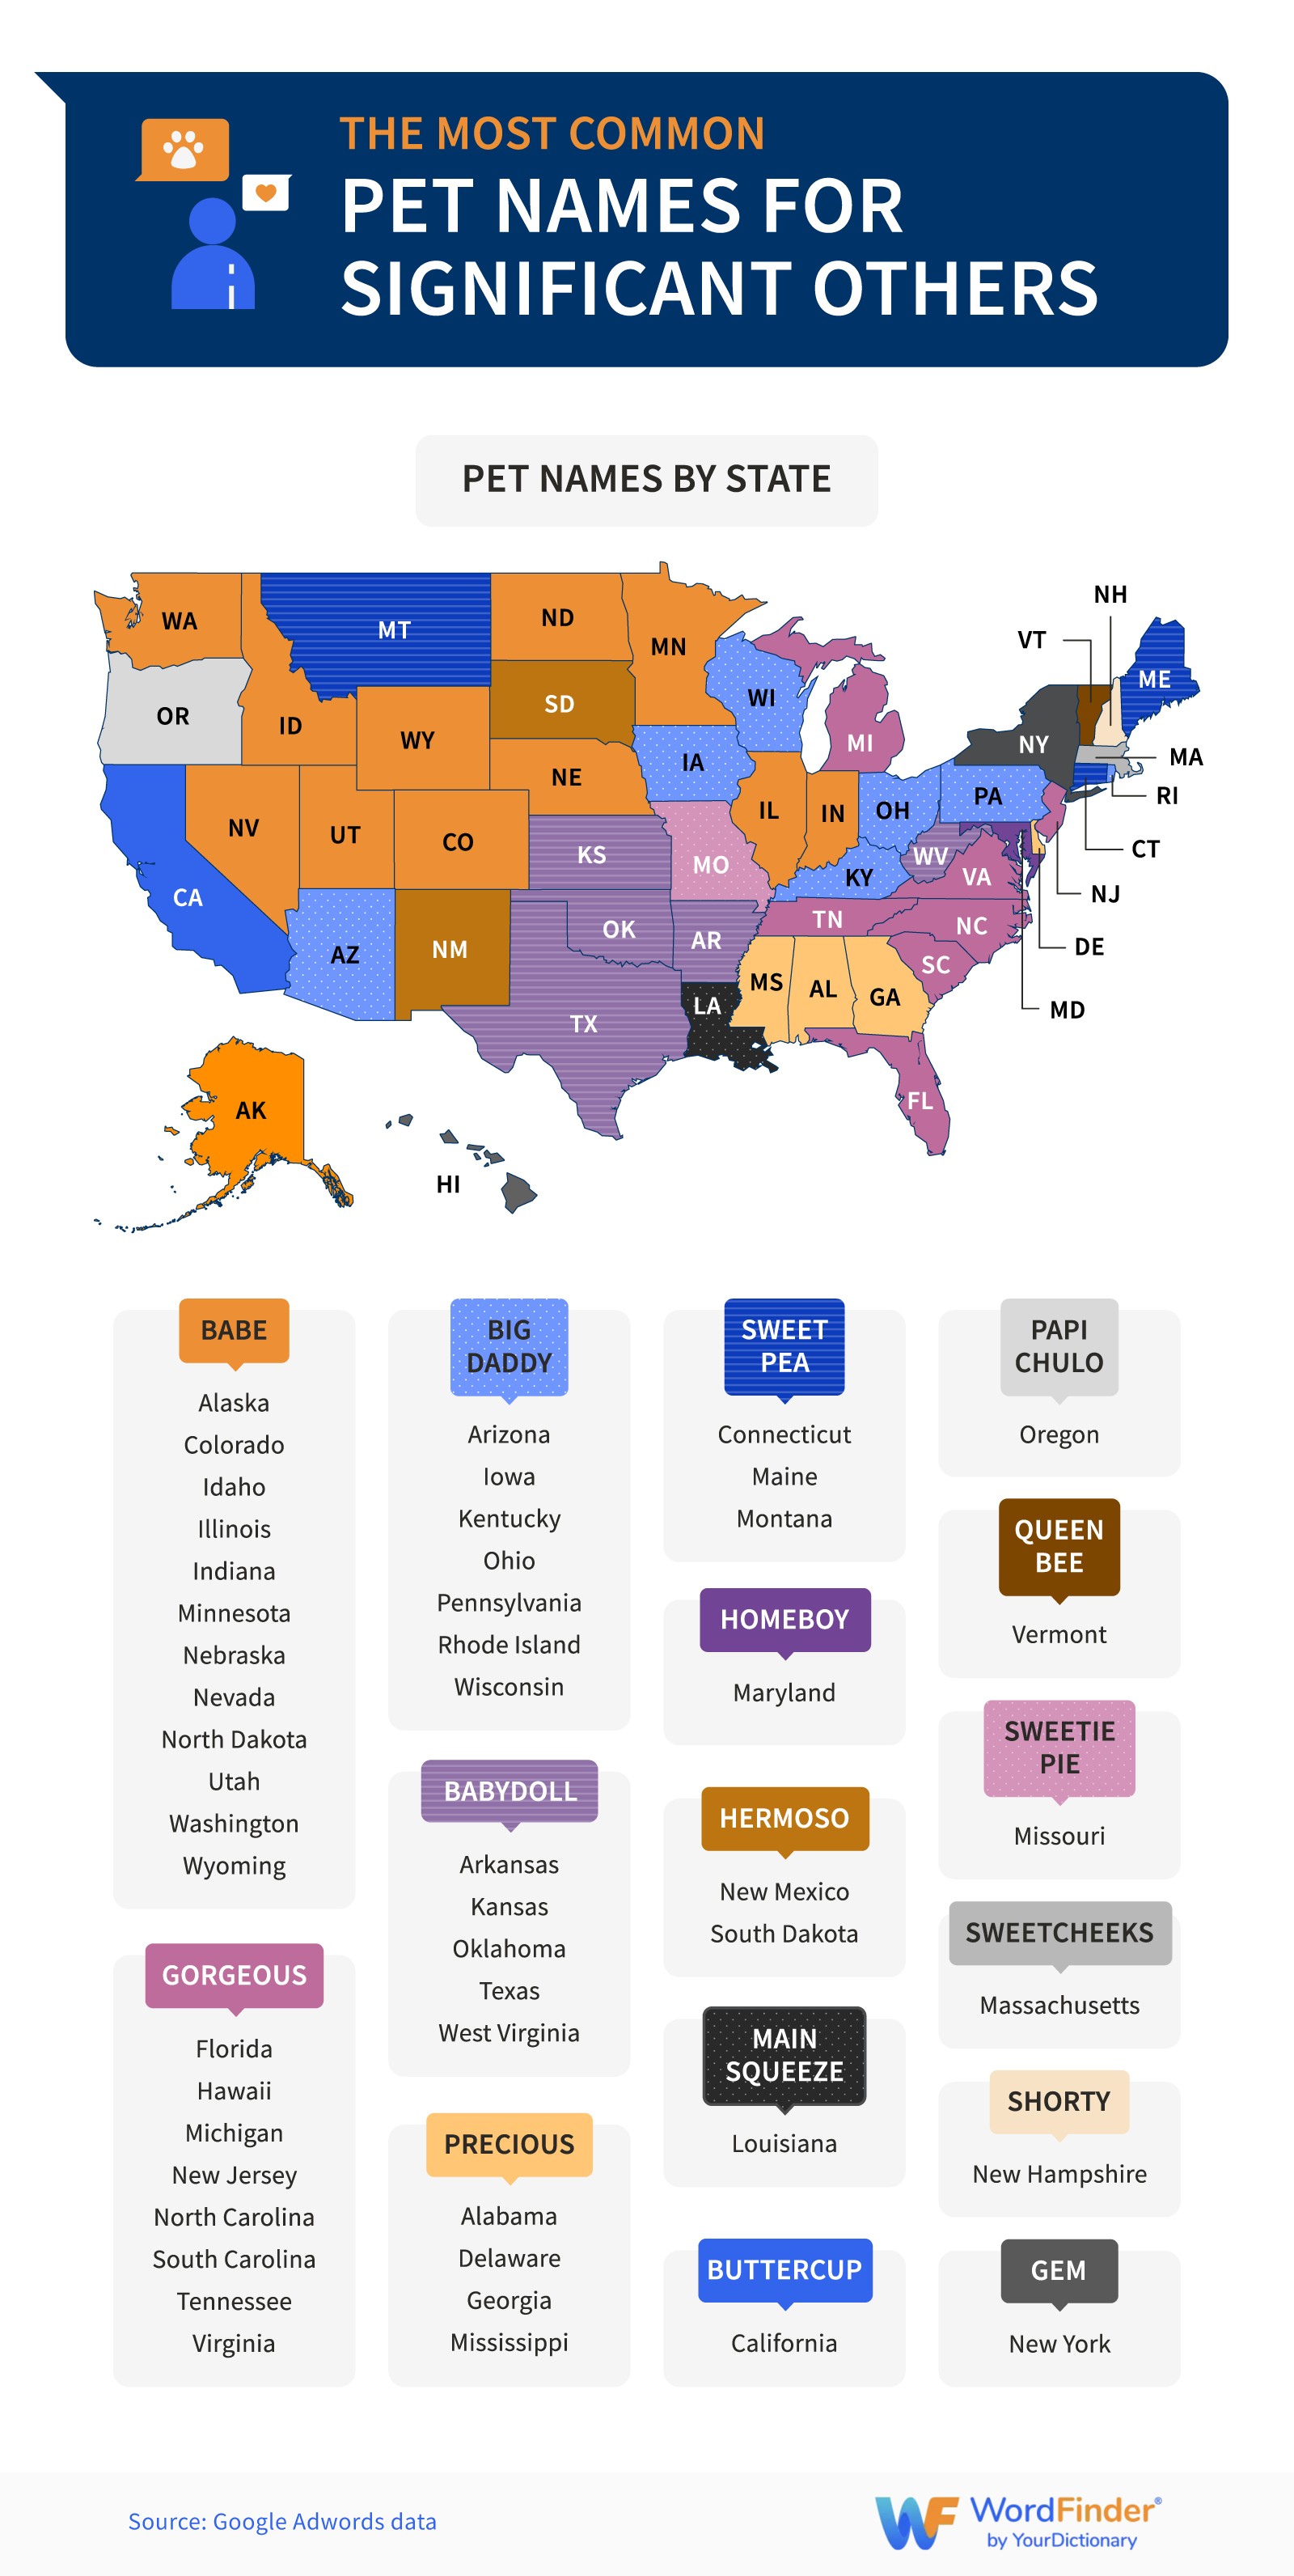 Slang by state - Common pet names for significant others